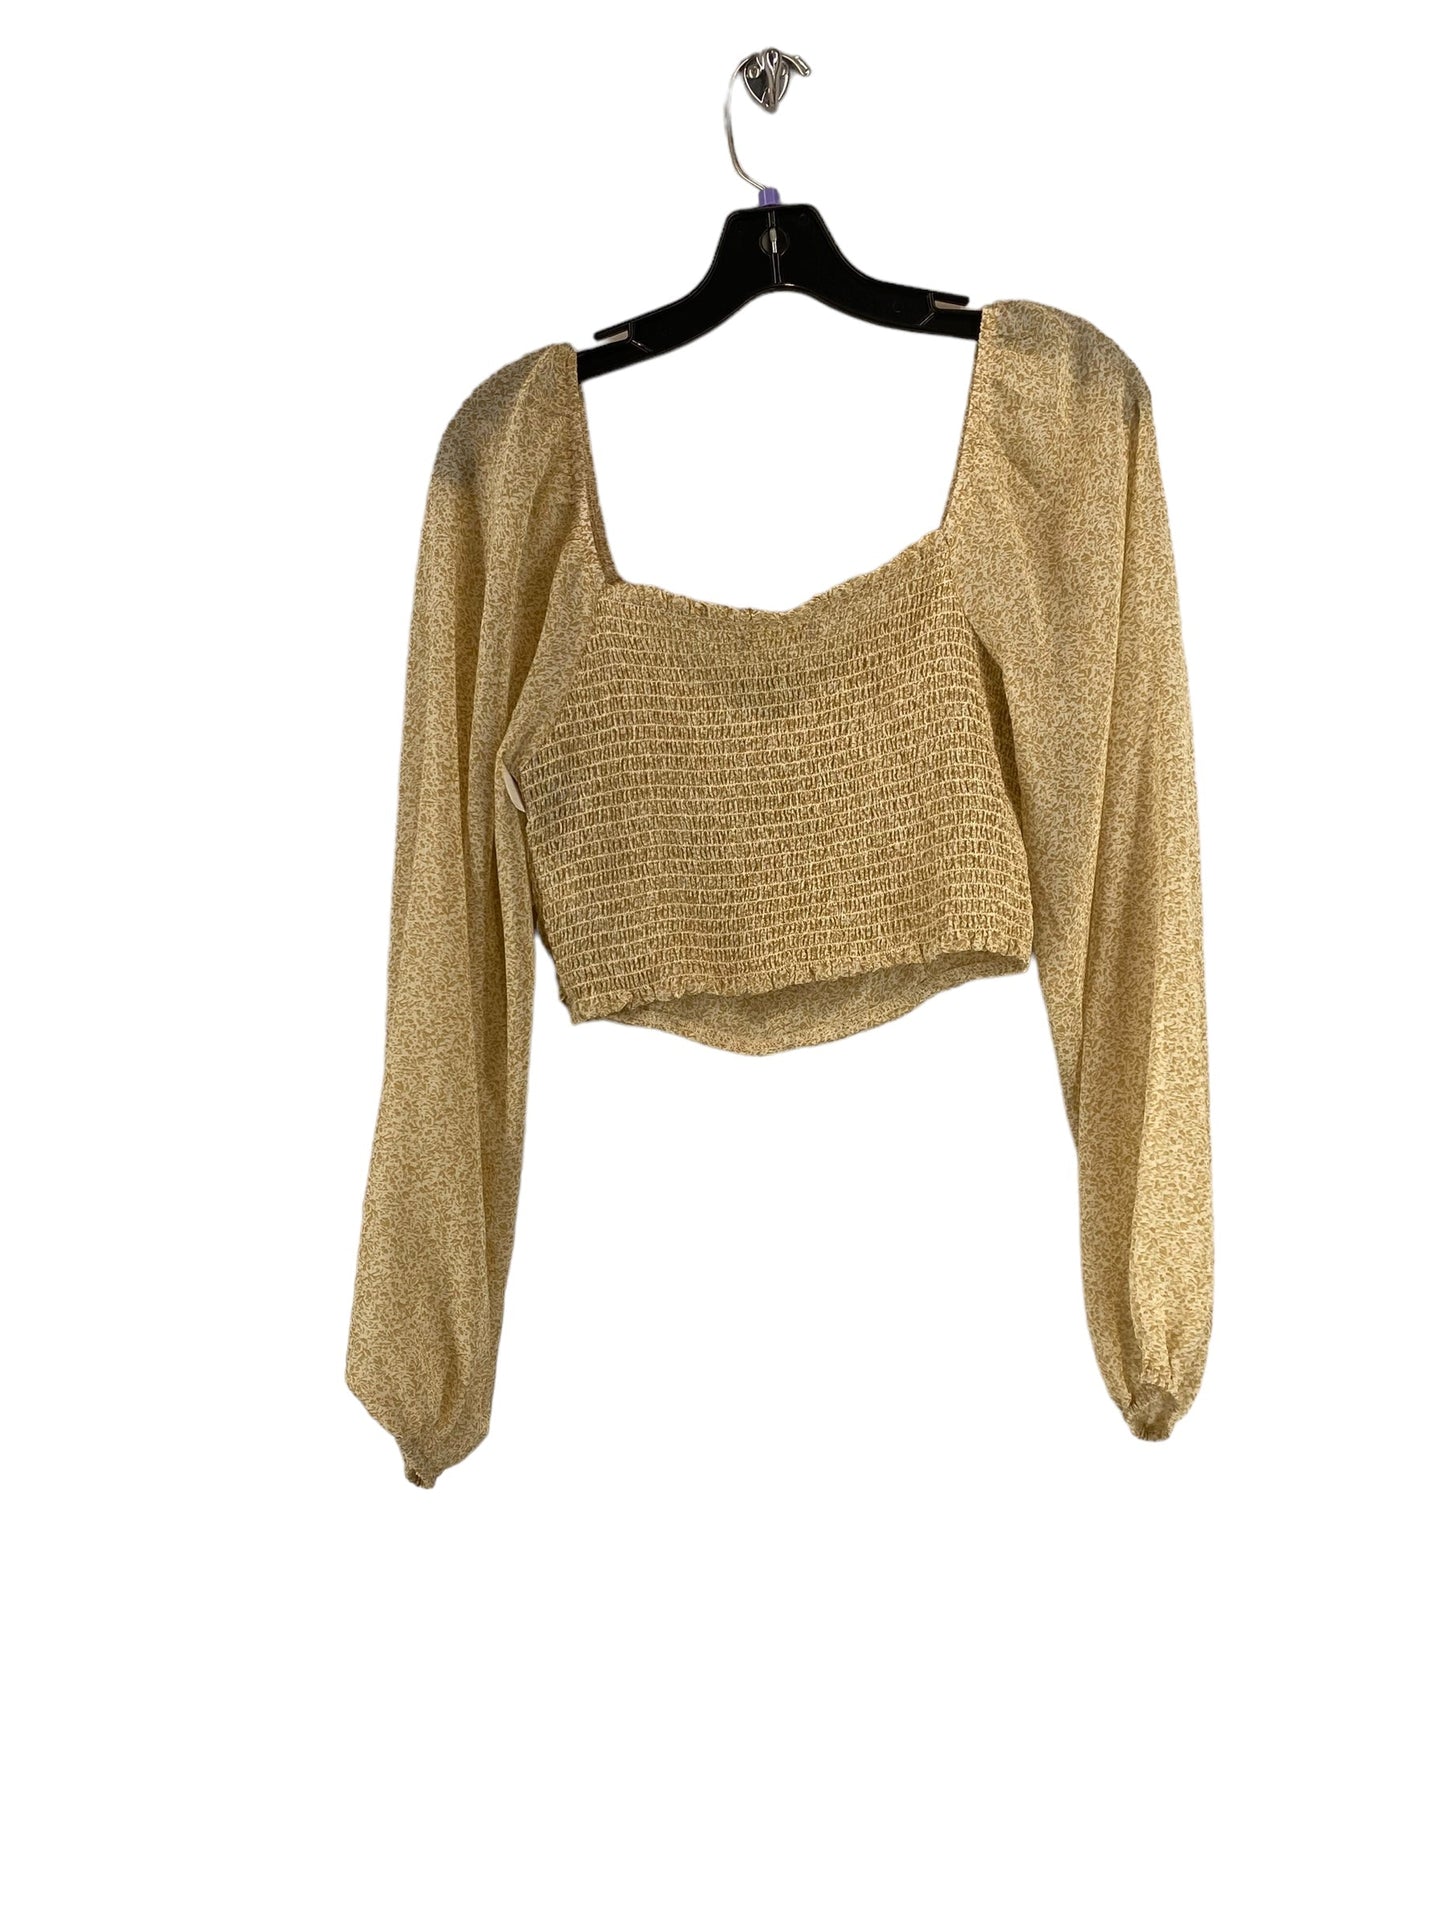 Yellow Top Long Sleeve Altard State, Size S